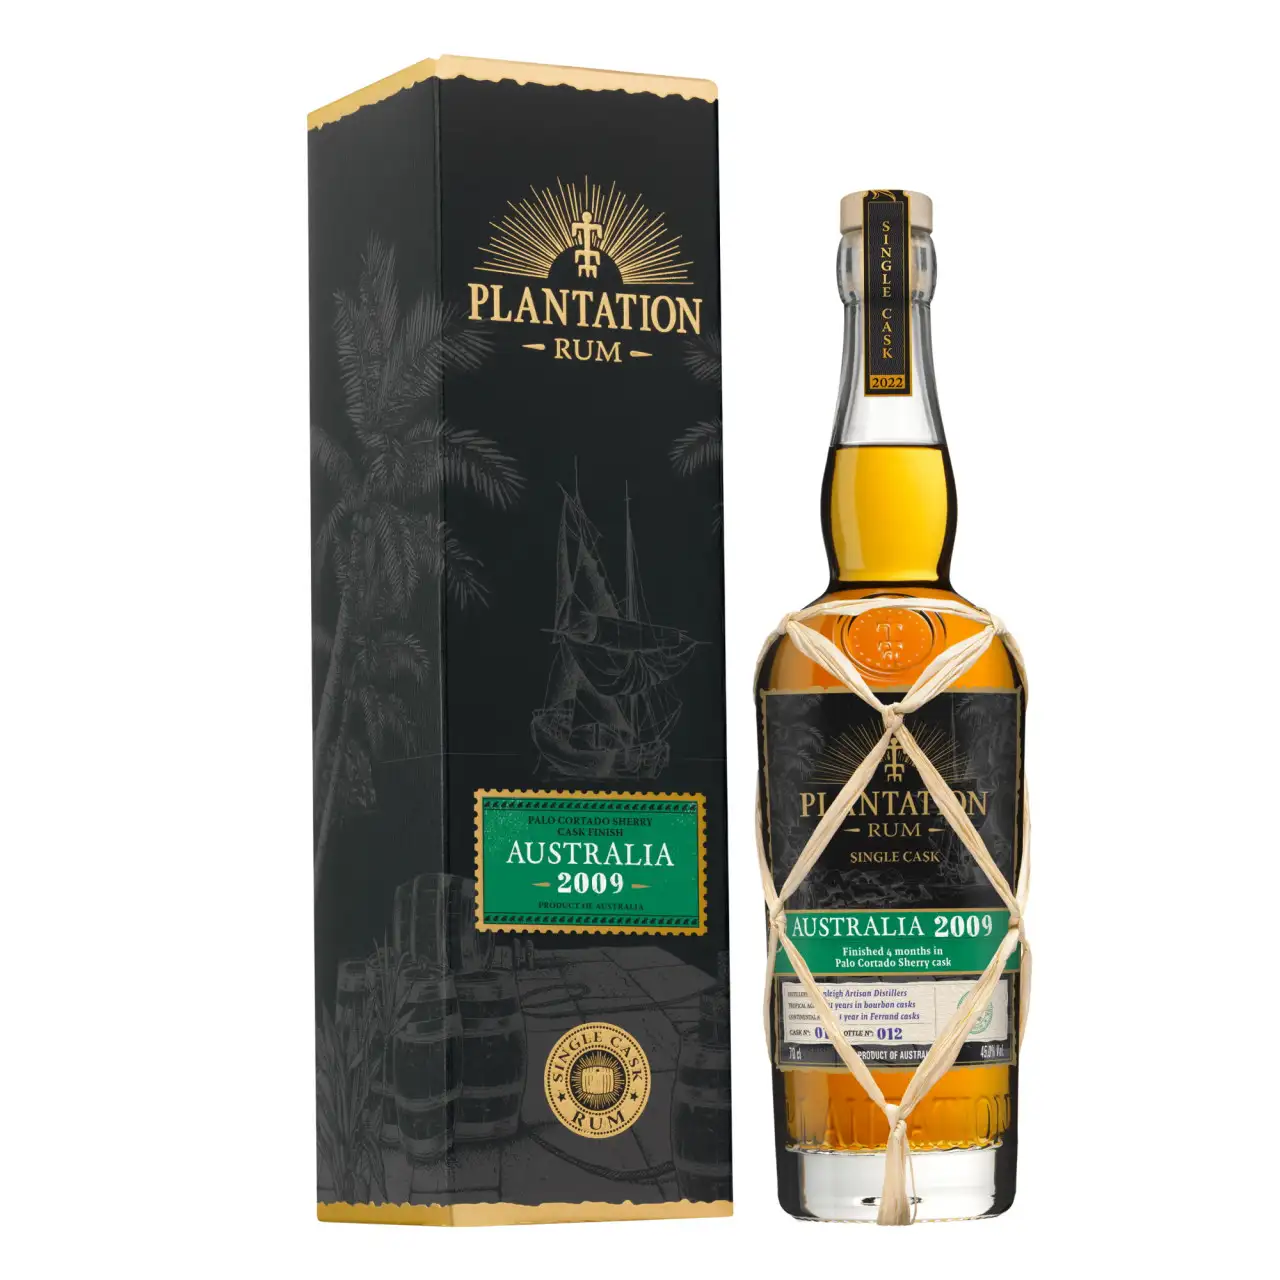 Image of the front of the bottle of the rum Plantation Sherry Palo Cortado Cask Finish (Single Cask 2022)